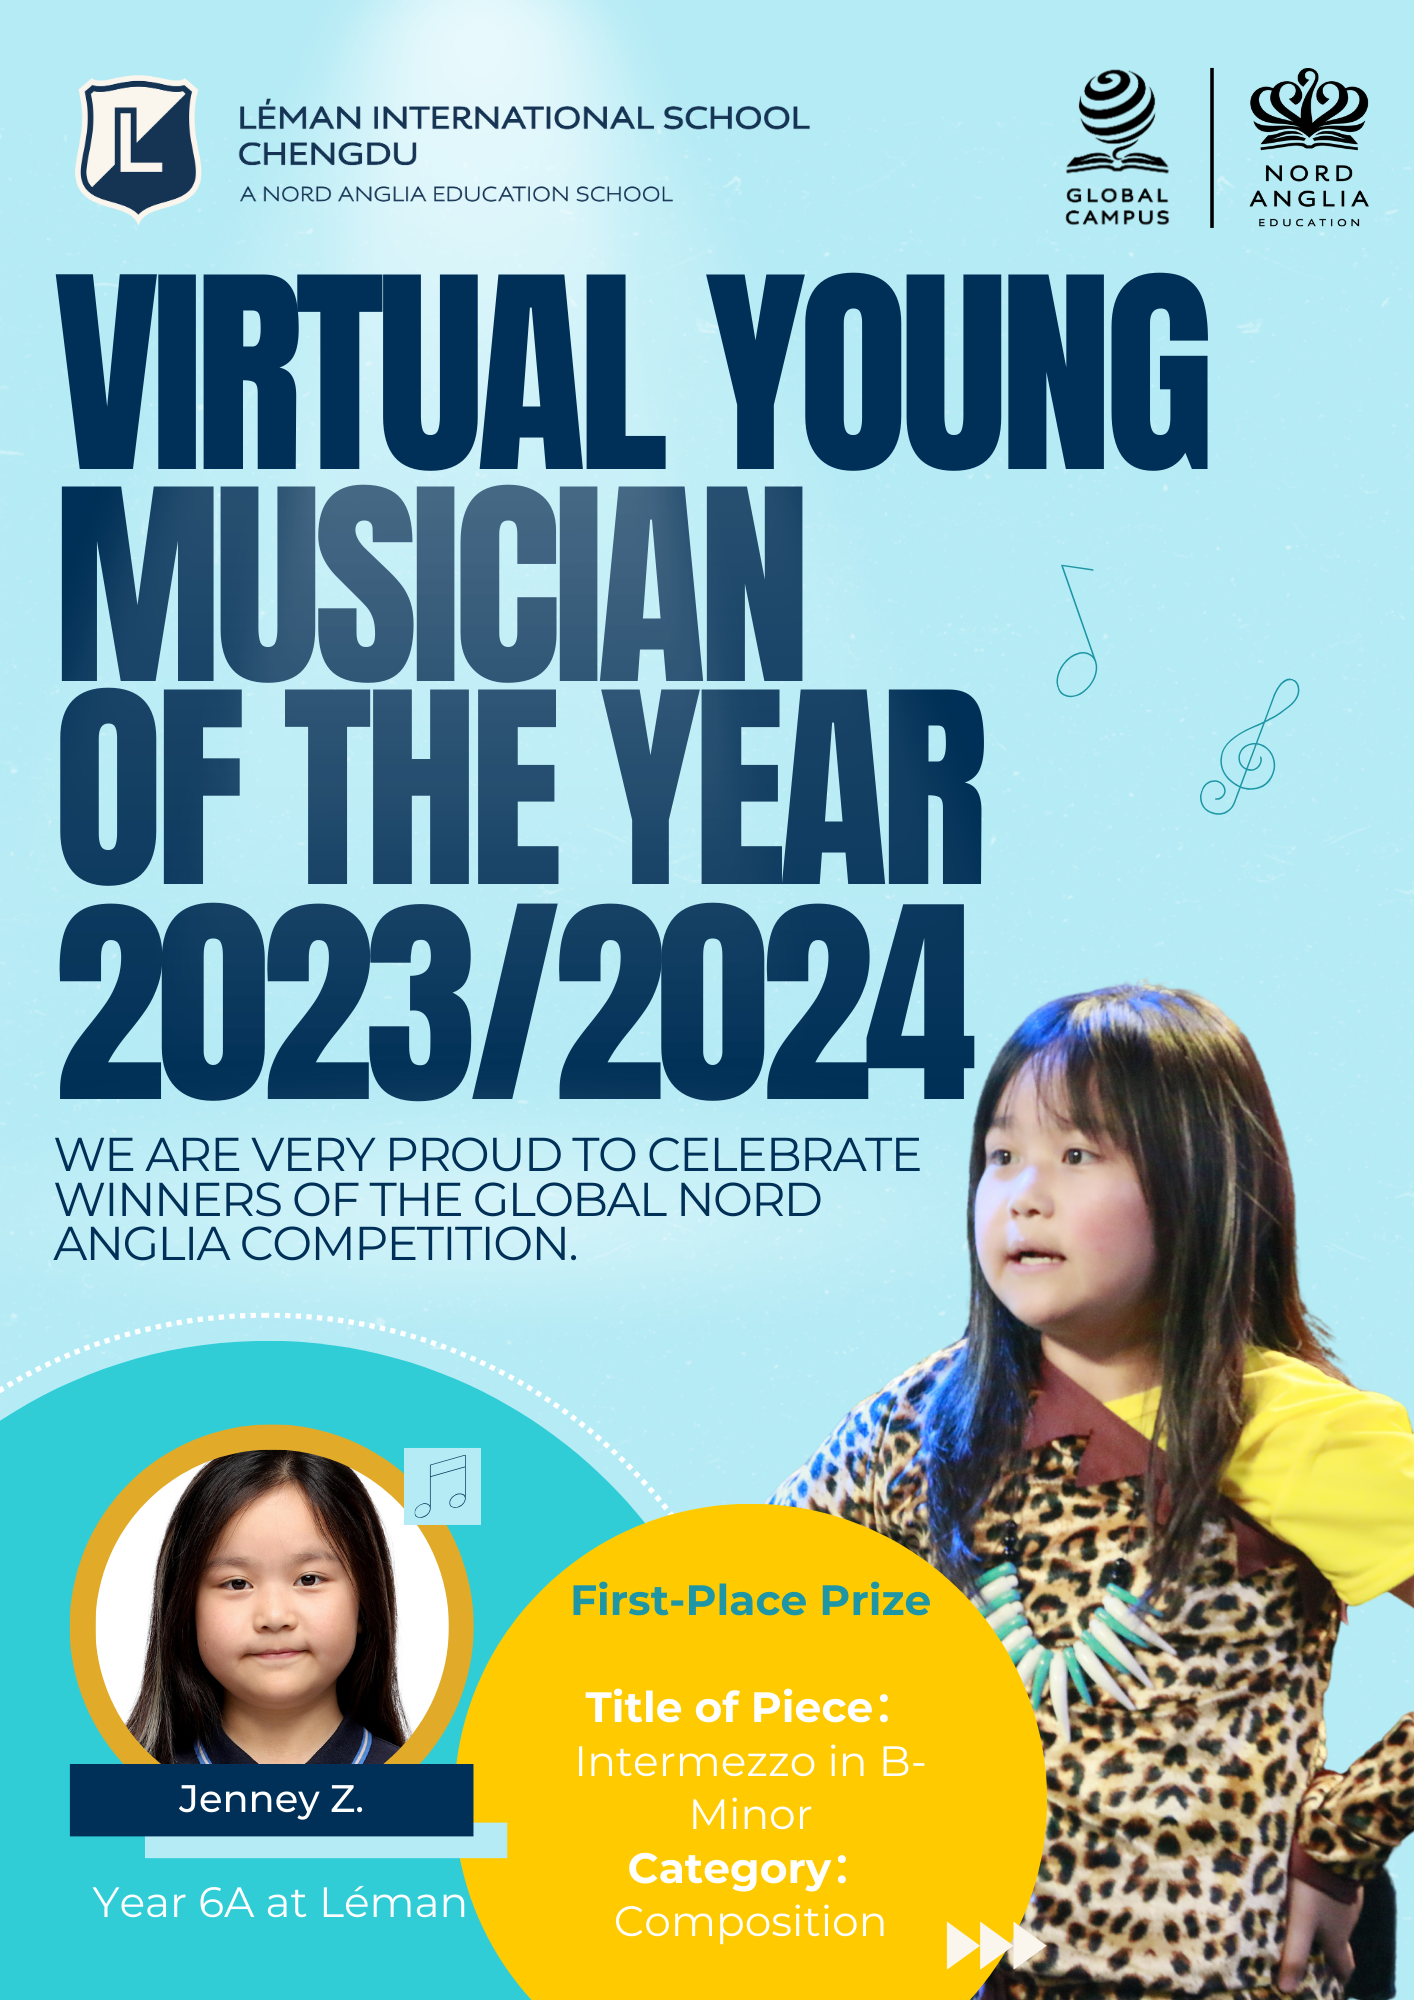 The Virtual Young Musician of the Year Competition - The Virtual Young Musician of the Year Competition